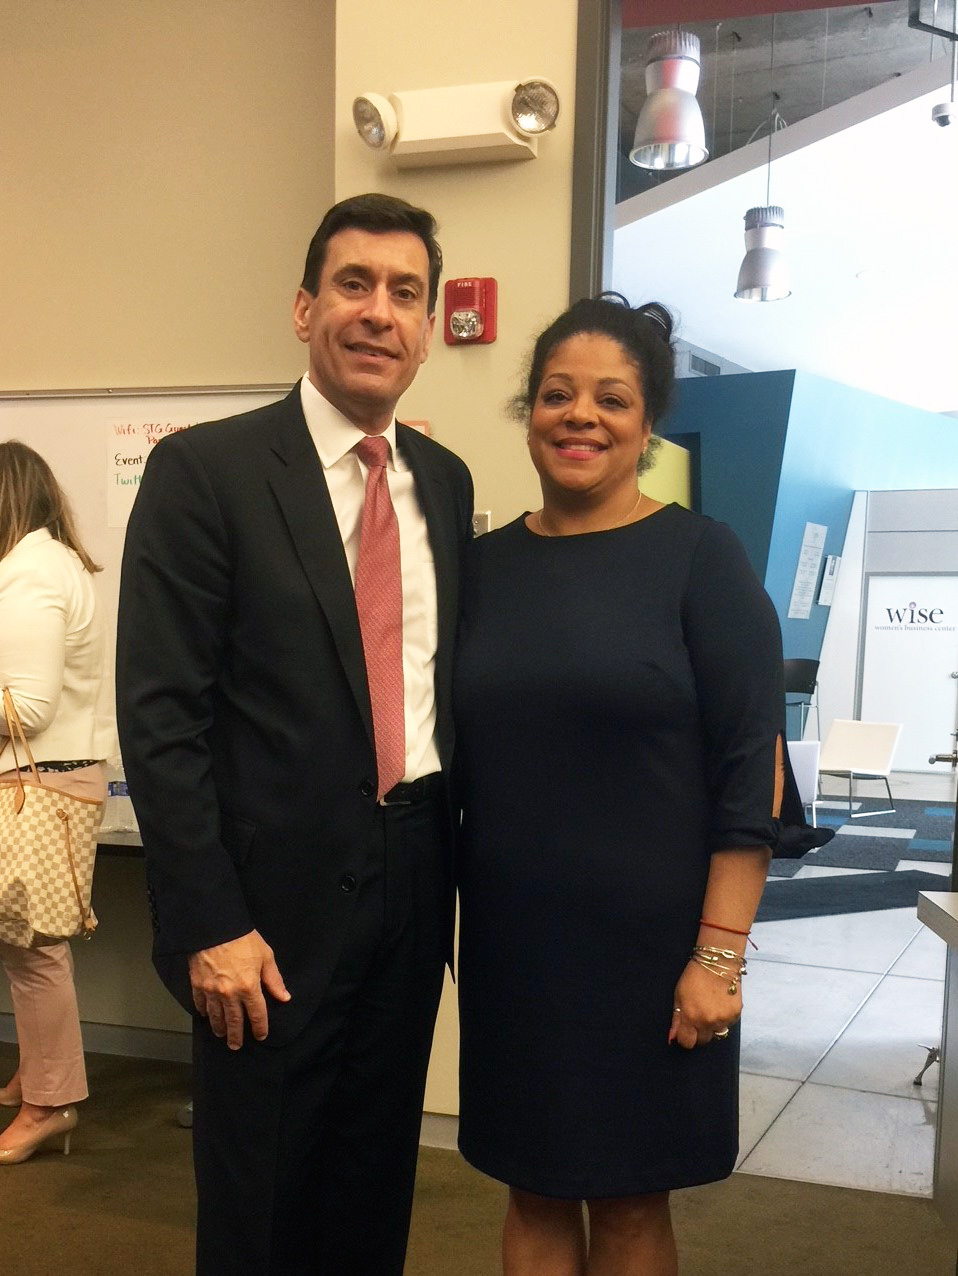 Chris Fisher with Assemblymember Pamela Hunter at 5G event in Syracuse